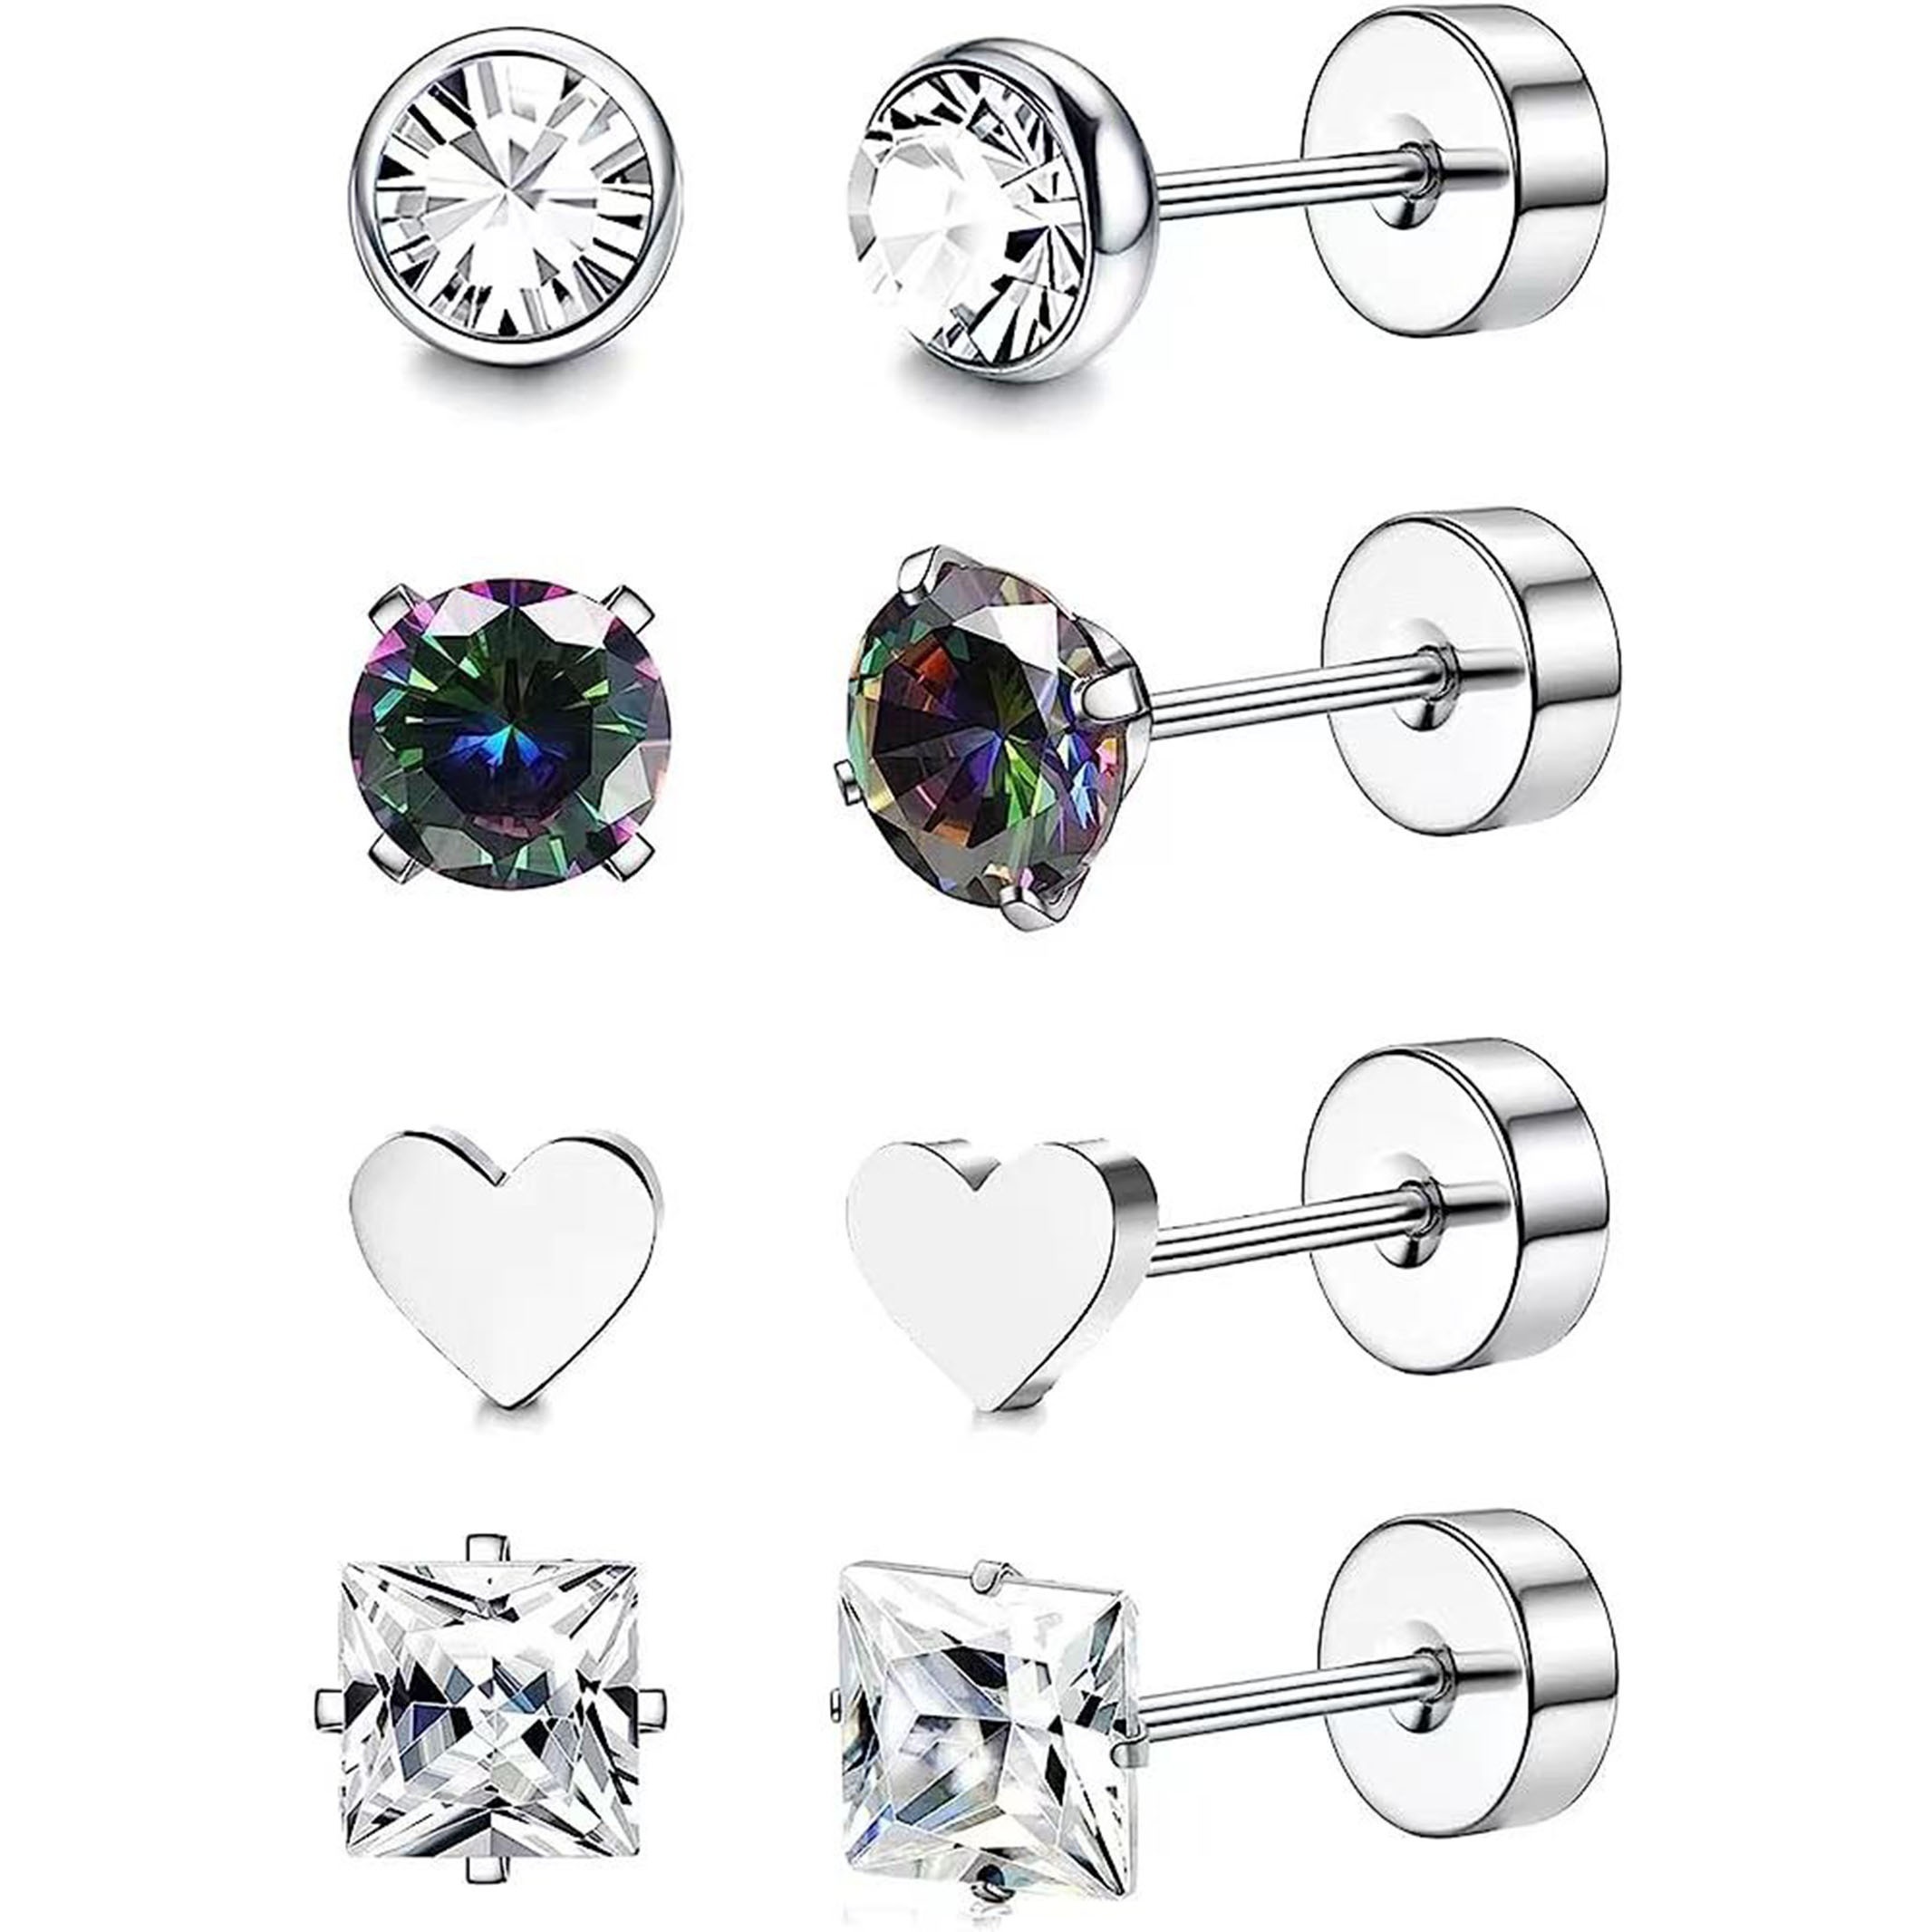 

4 Pairs Set Of Tiny Delicate Stud Earrings 316l Stainless Steel Jewelry Zircon Inlaid Elegant Simple Style Delicate Female Gift